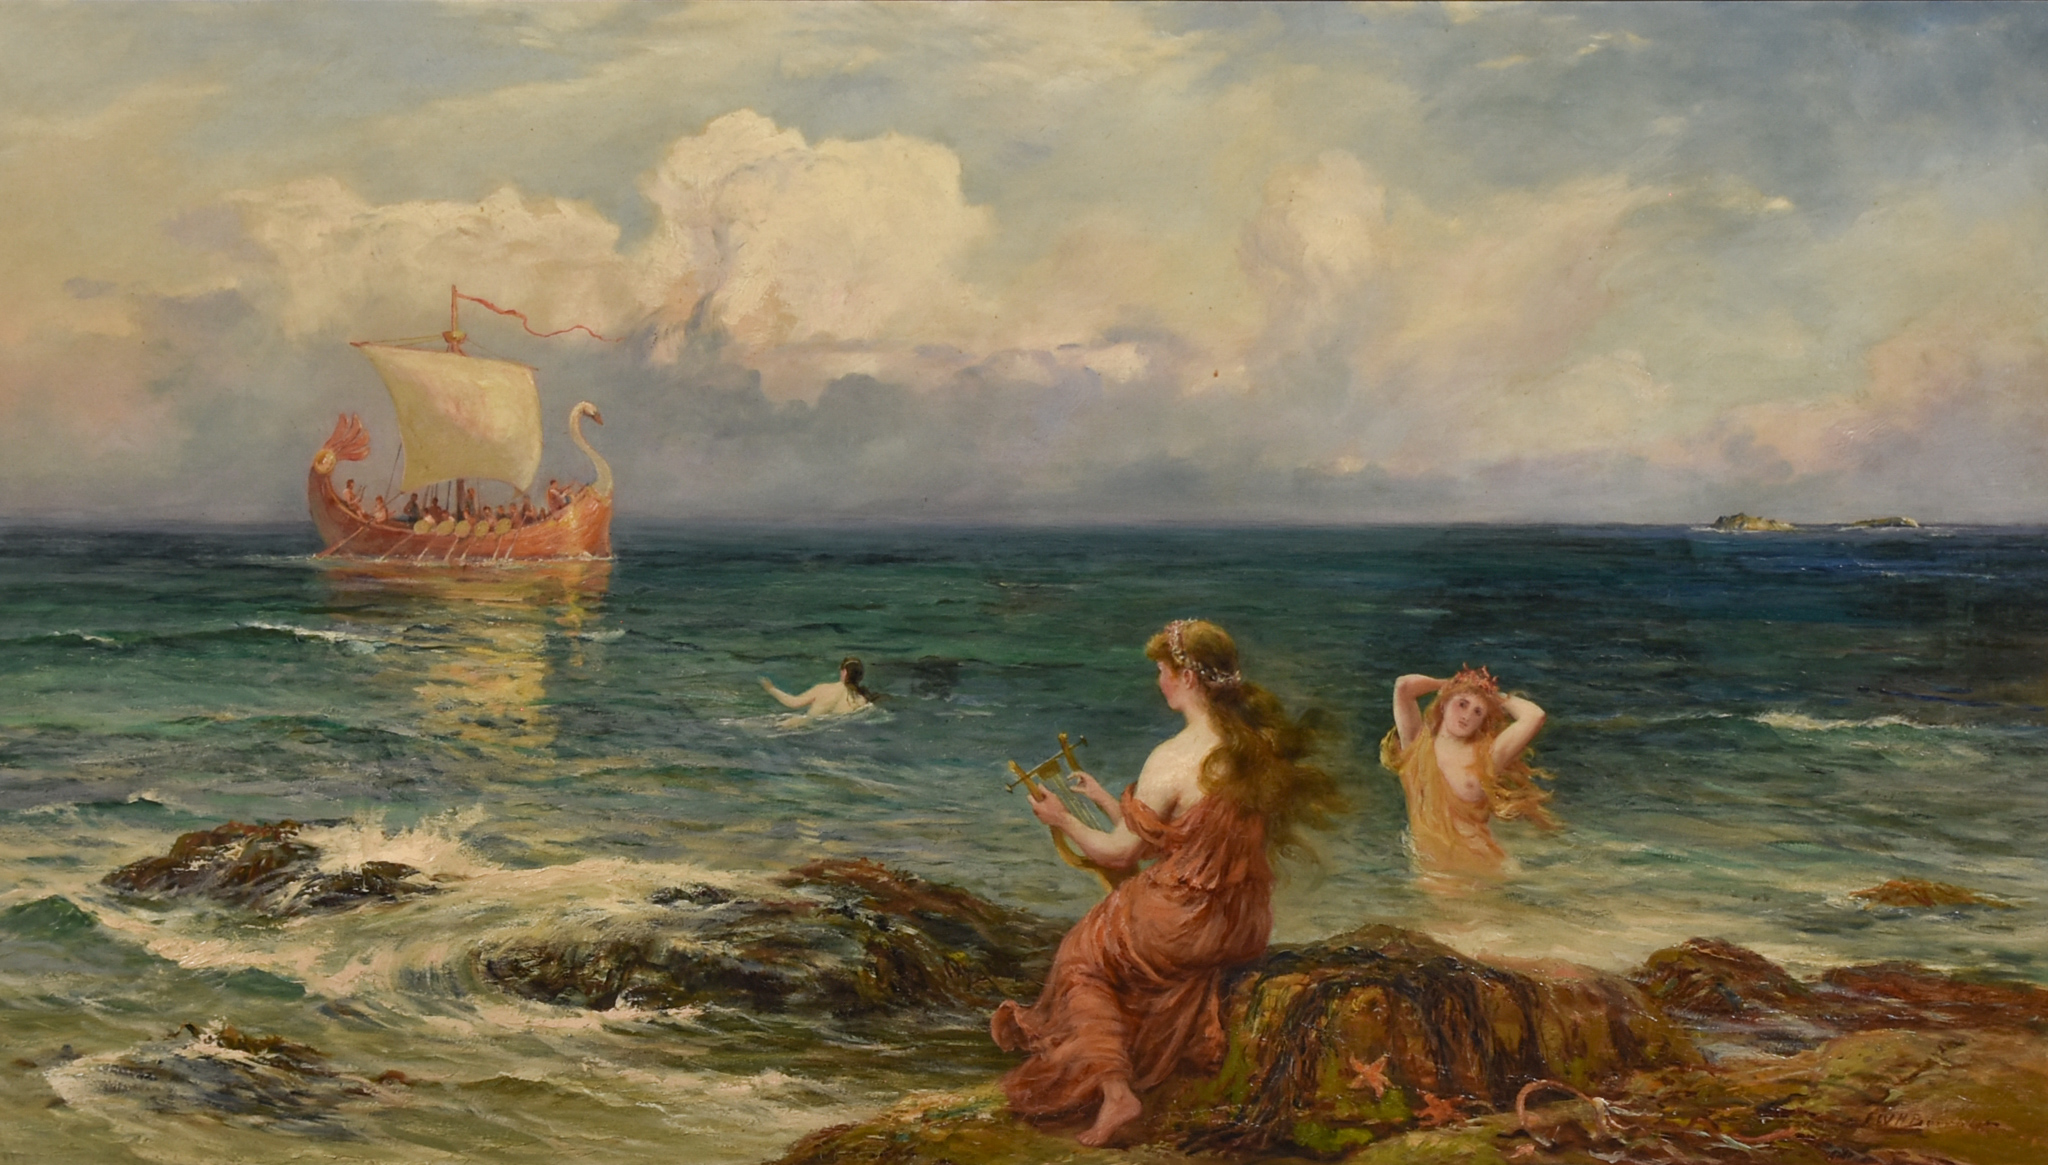 William Henry Borrow (1863-1901) - Oil painting - "The Sirens", signed, canvas 26ins x 46ins, in